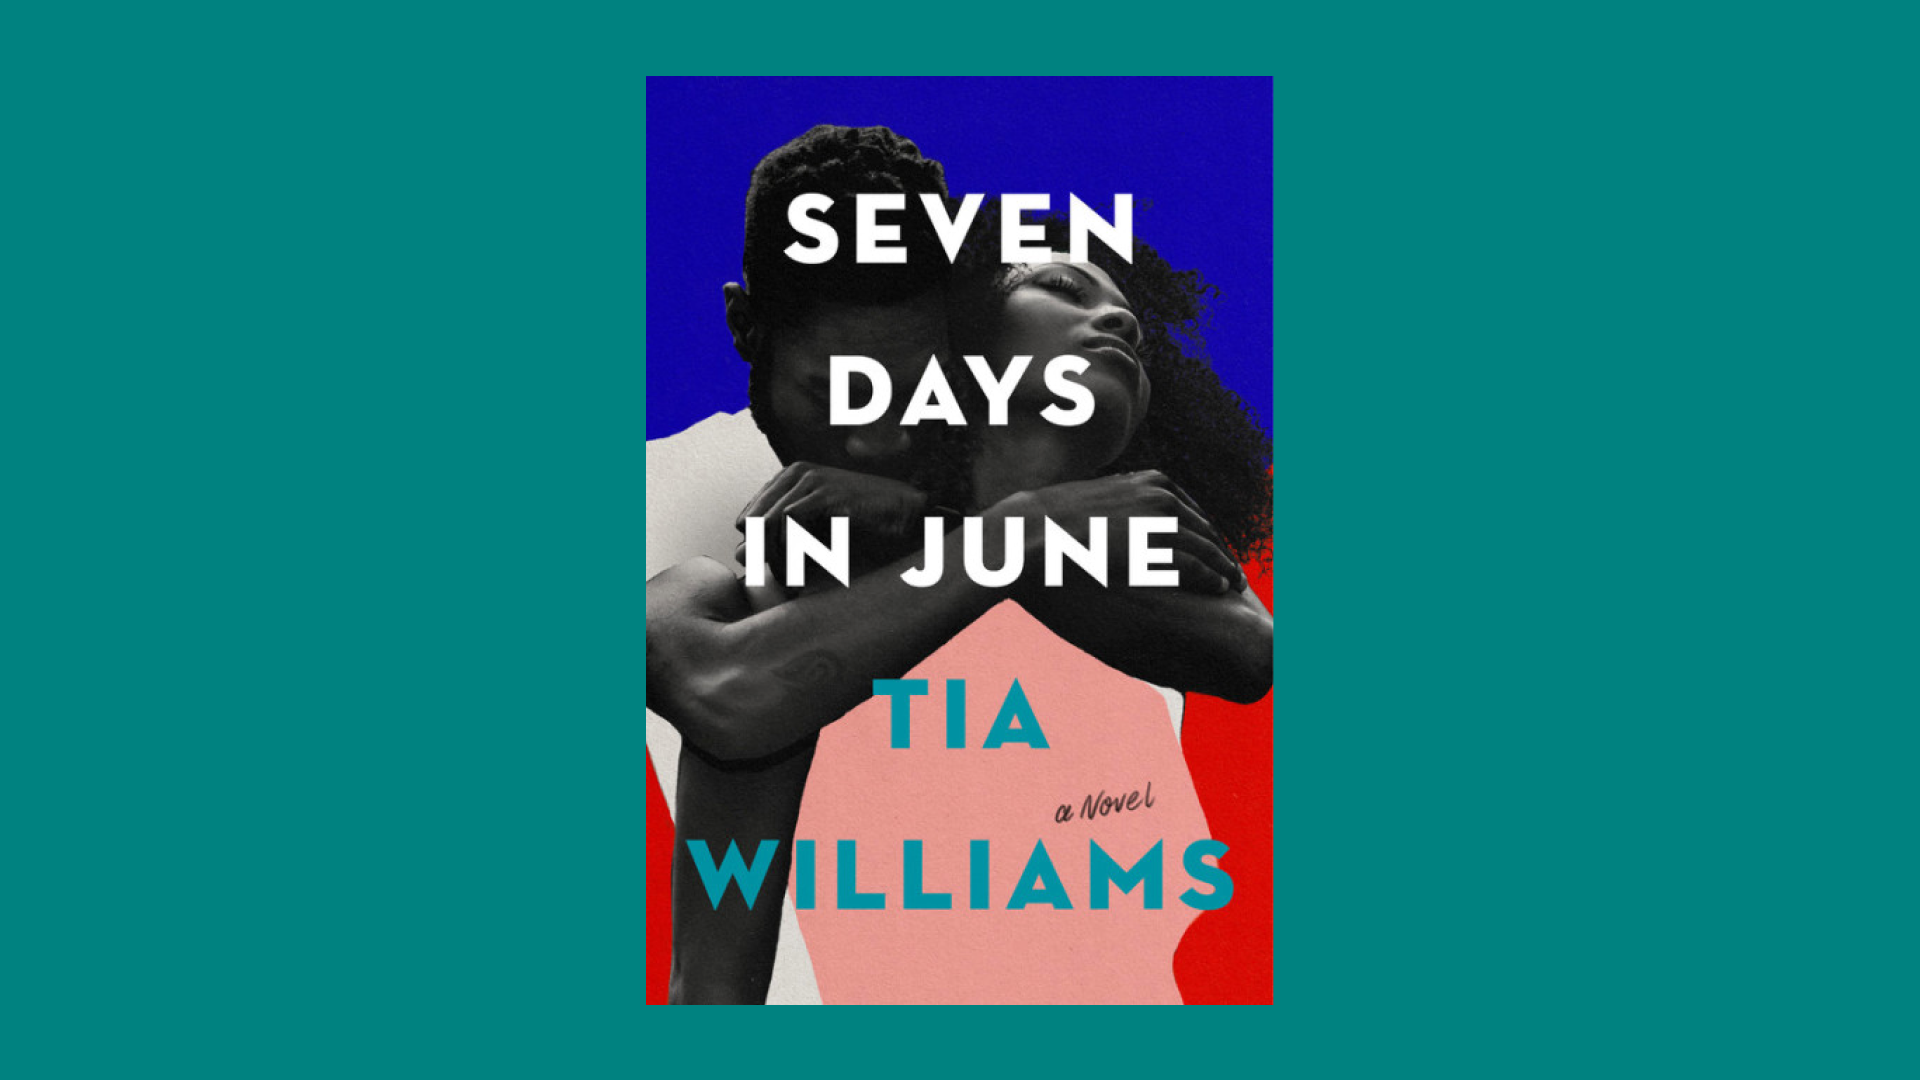 “Seven Days in June” by Tia Williams